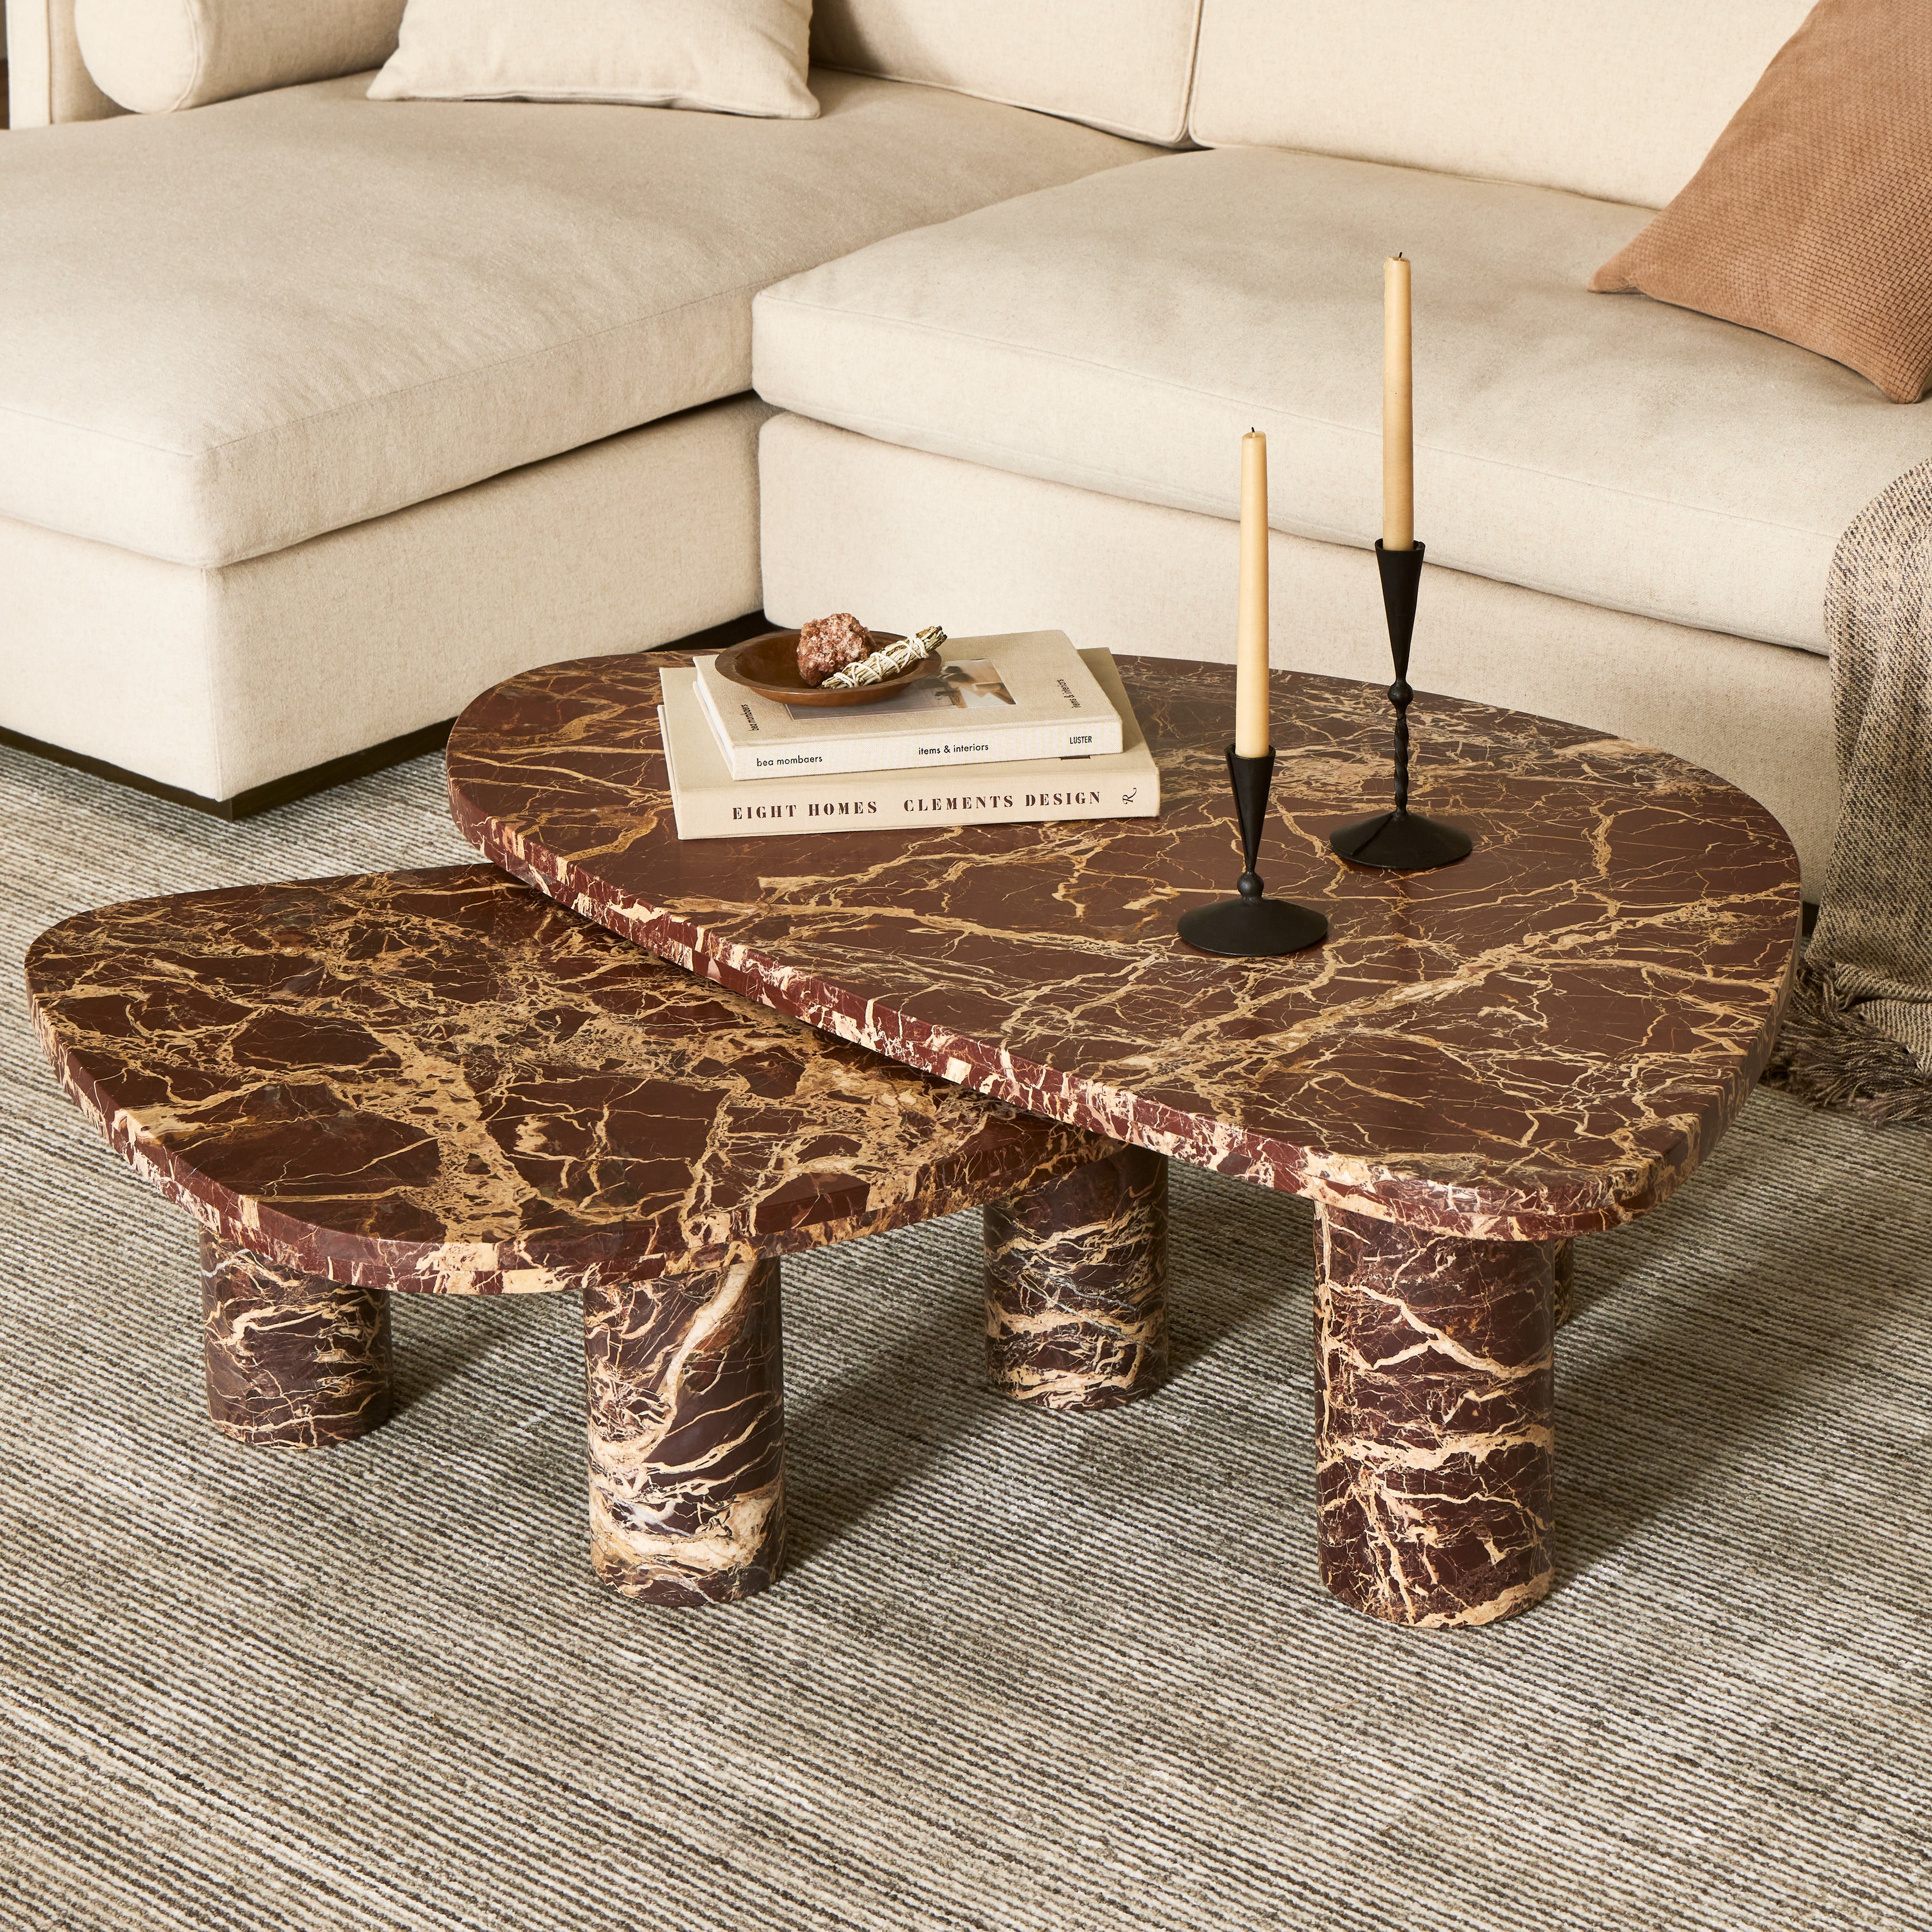 Made from solid marble with visible natural veining, turned pillar-style legs complement organically shaped tabletops, perfectly sized for nesting. Option to buy tables individually or together as a two-piece set. Amethyst Home provides interior design, new construction, custom furniture, and area rugs in the Dallas metro area.